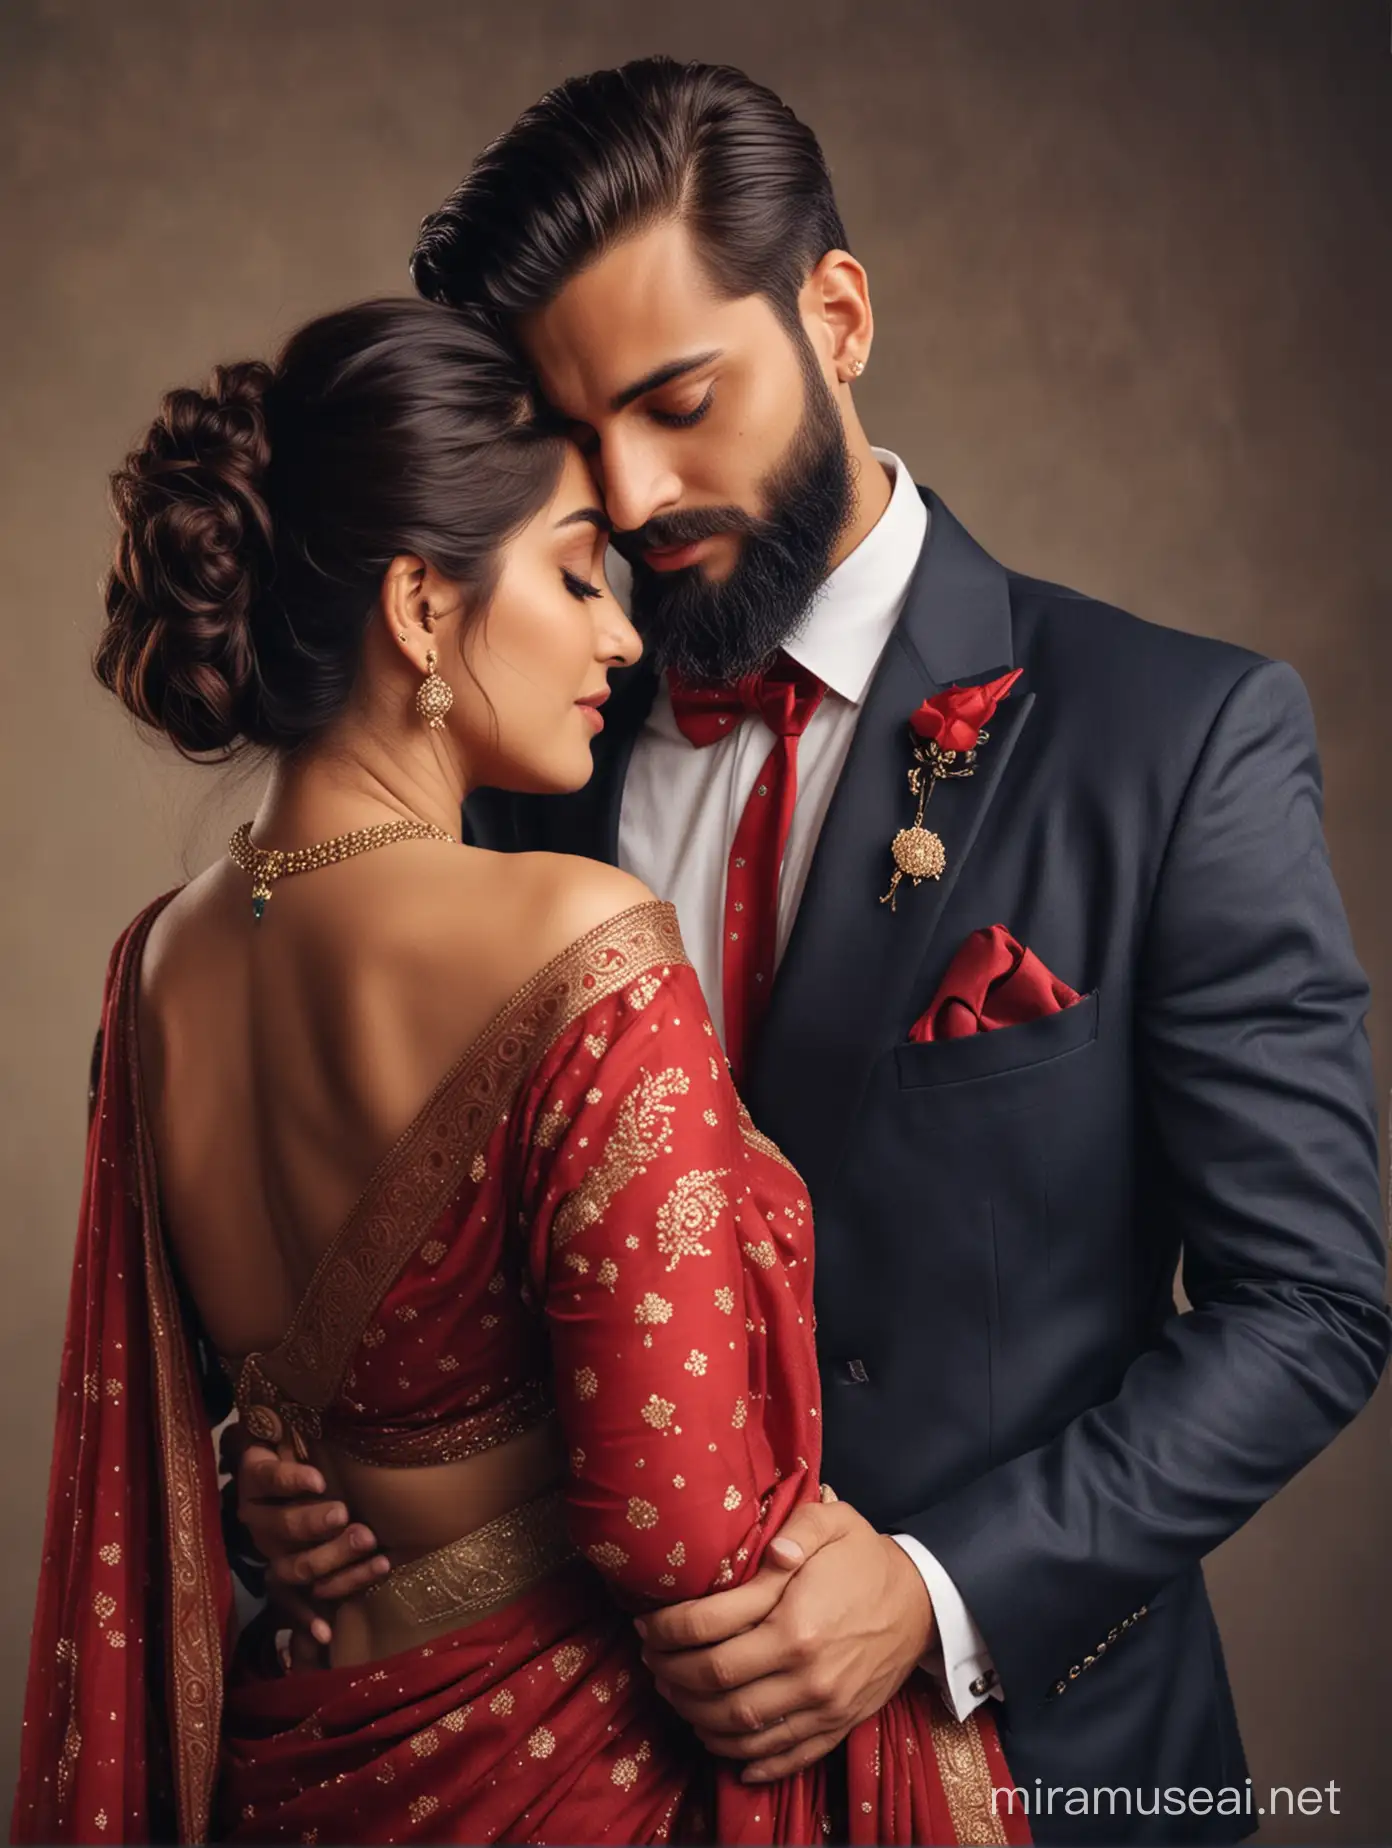 Embracing Indian Couple in Traditional Attire Romantic Moment Captured in Stunning Detail